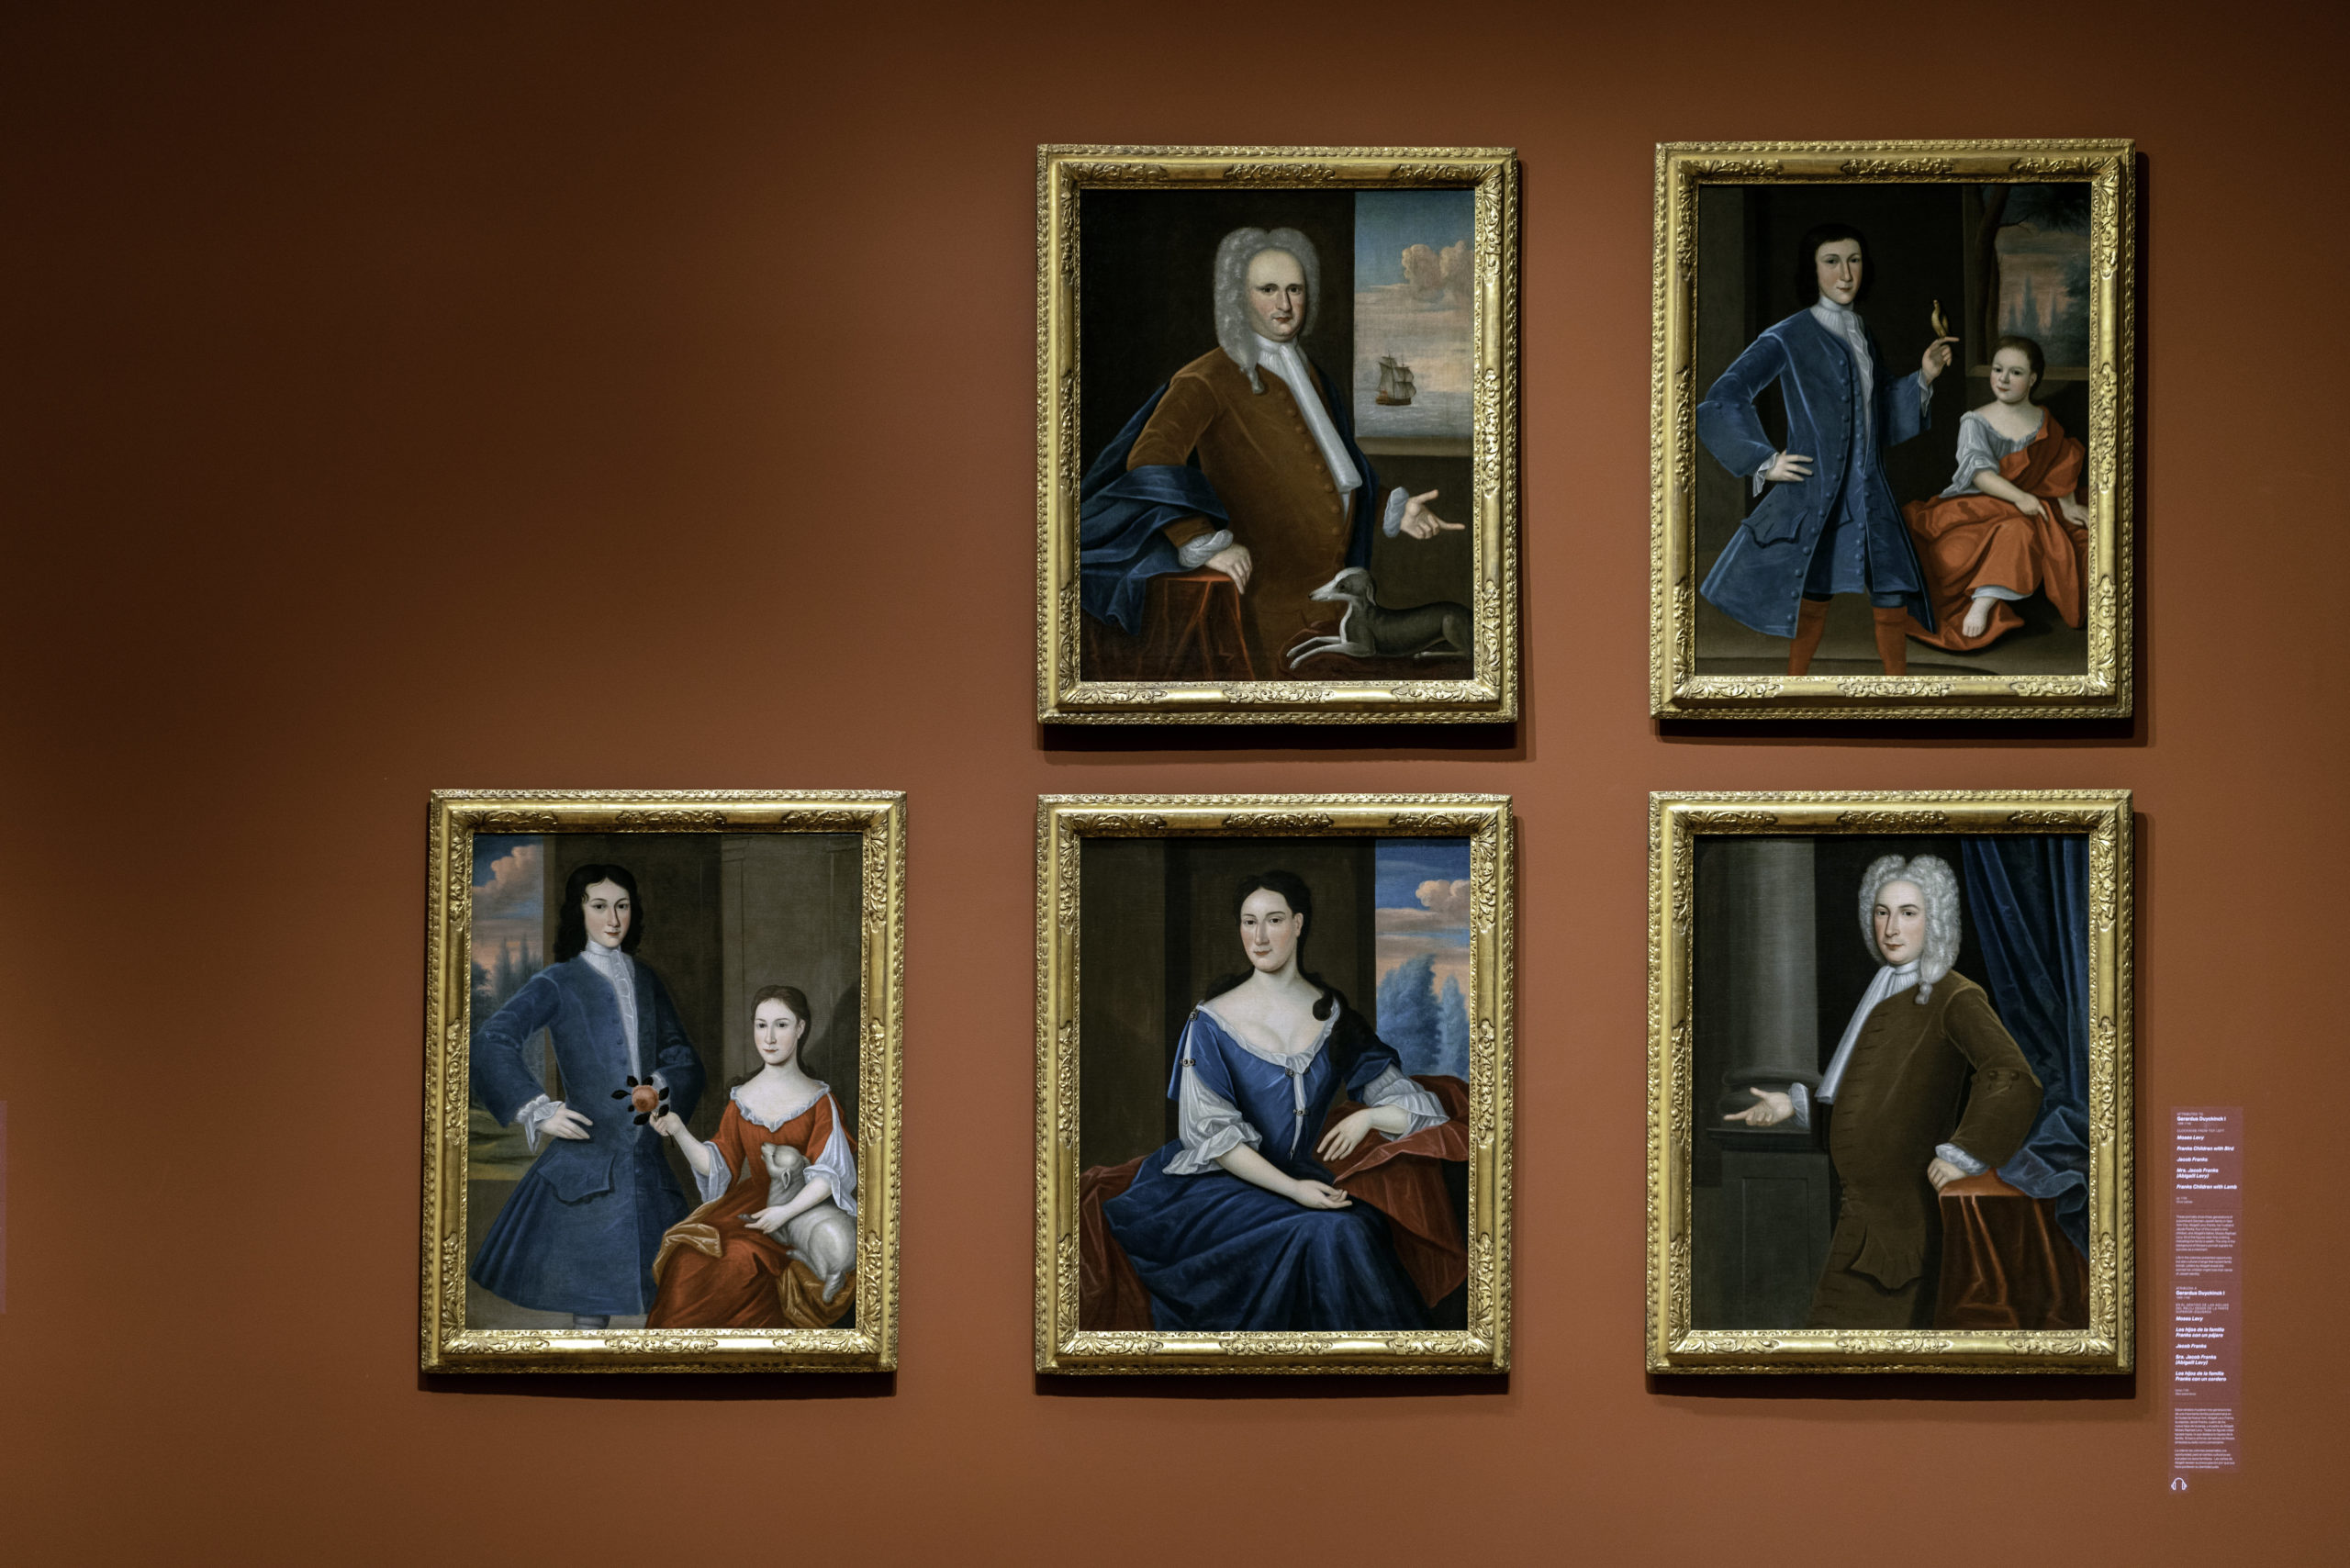 Gerardus Duyckinck I (attributed), six portraits of the Levy-Franks family (Franks Children with Bird, Franks Children with Lamb, Jacob Franks, Moses Levy, Mrs. Jacob Franks (Abigaill Levy), and Ricka Franks), c. 1735, oil on canvas, Crystal Bridges Museum of American Art (photo: Steven Zucker, CC BY-NC-SA 2.0)